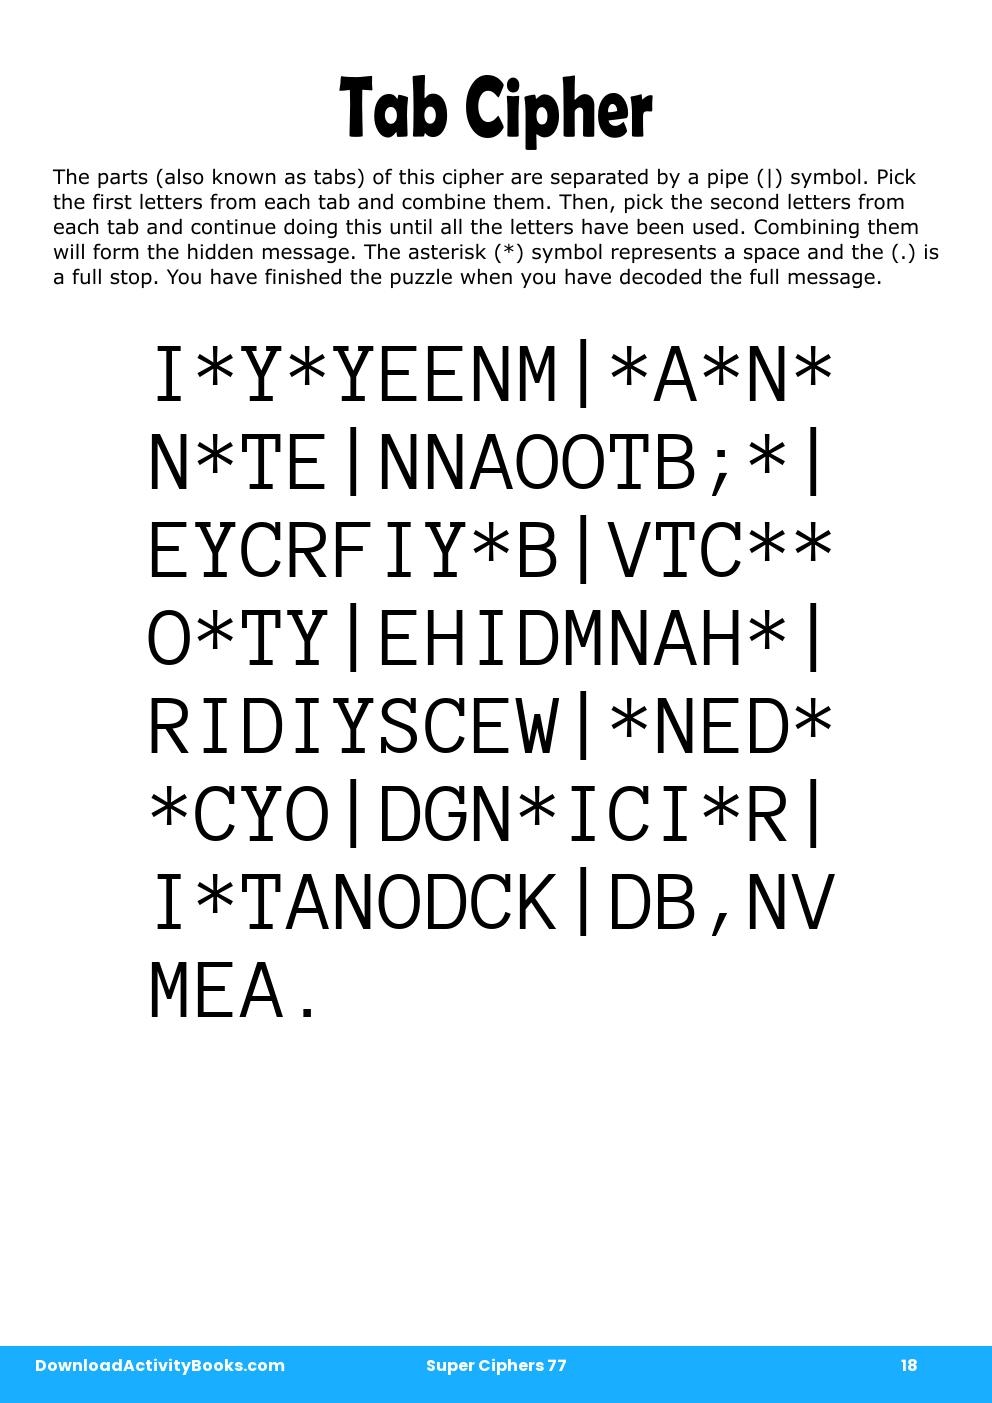 Tab Cipher in Super Ciphers 77